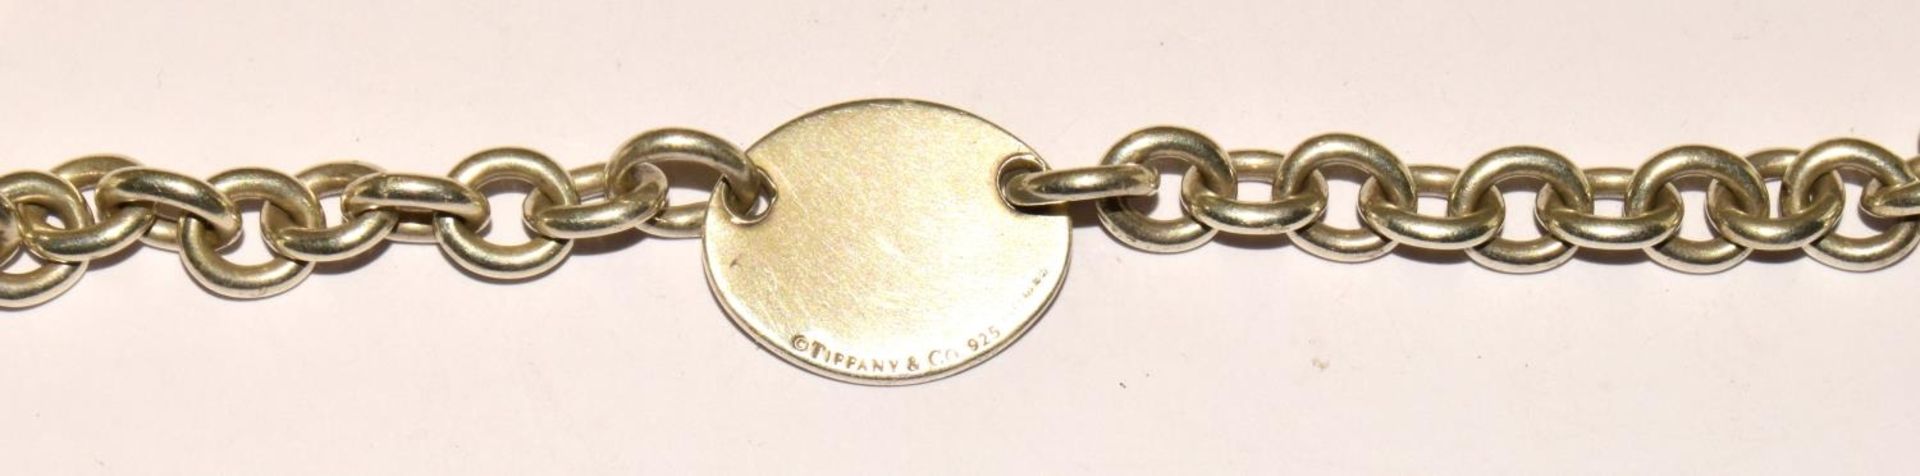 925 silver bracelet marked Tiffany and co ref 250 - Image 3 of 3